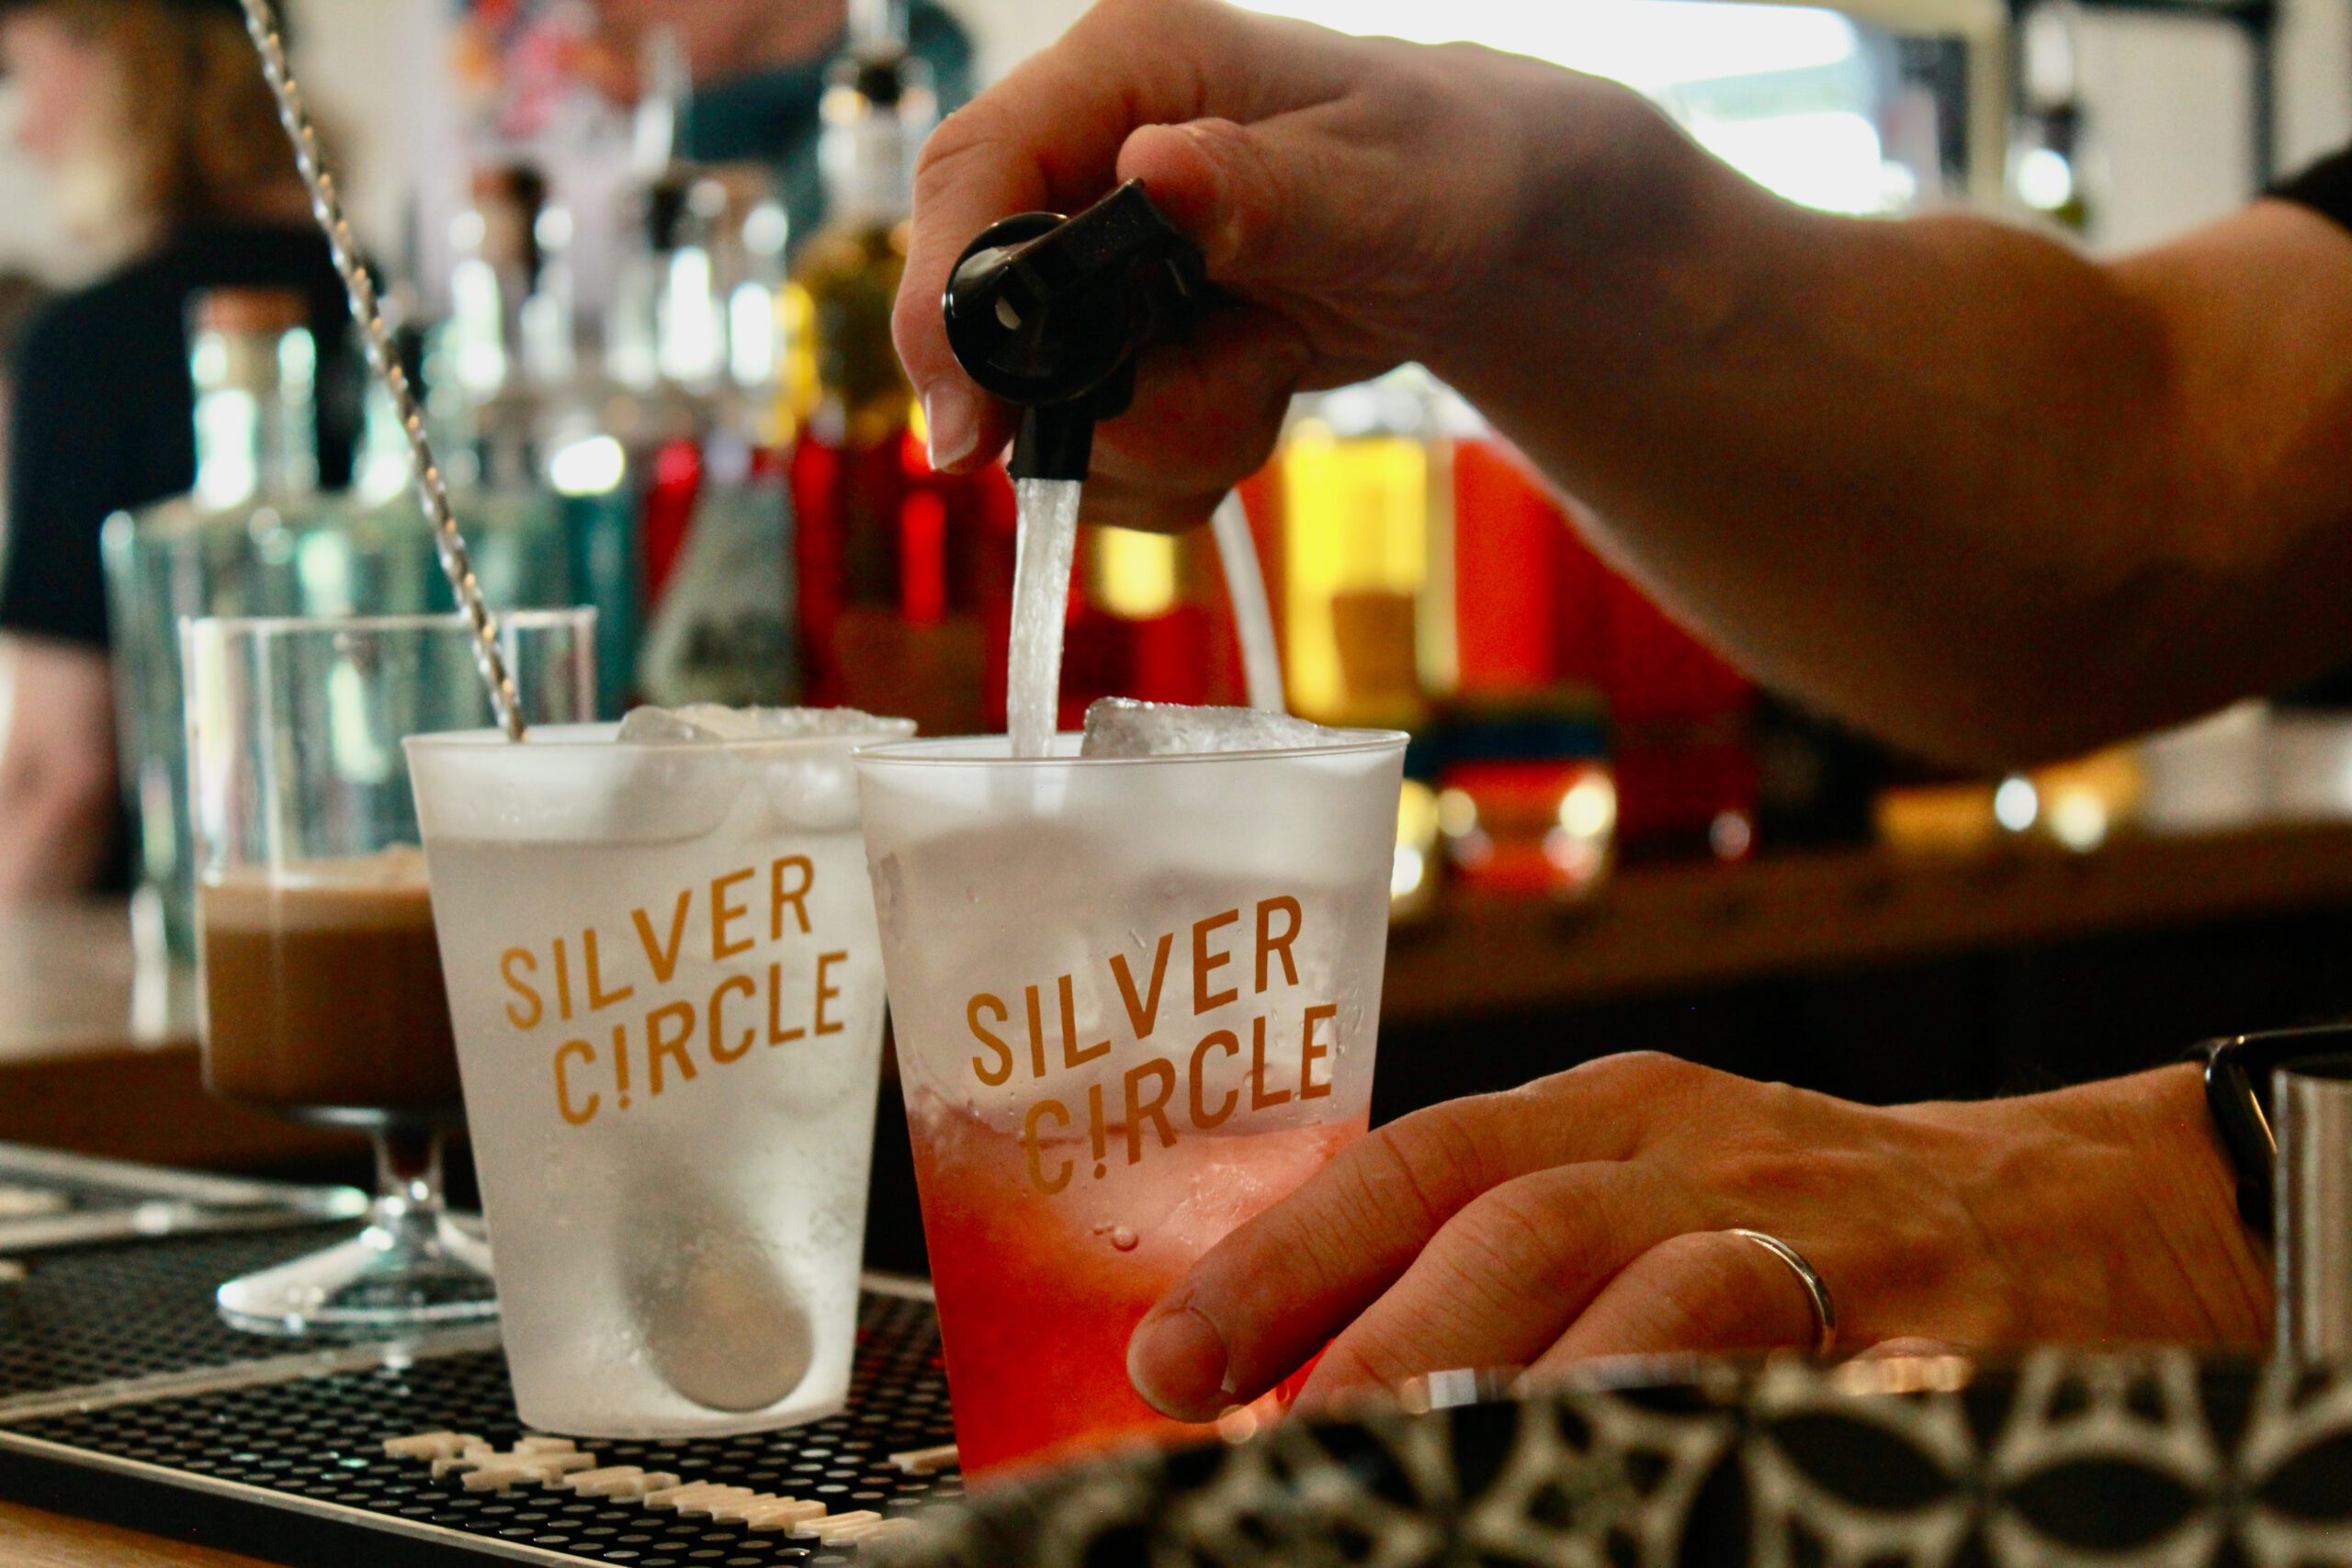 HALF PRICE 1 x Adult Silver Circle Distillery Tour | WAS £20 NOW £10